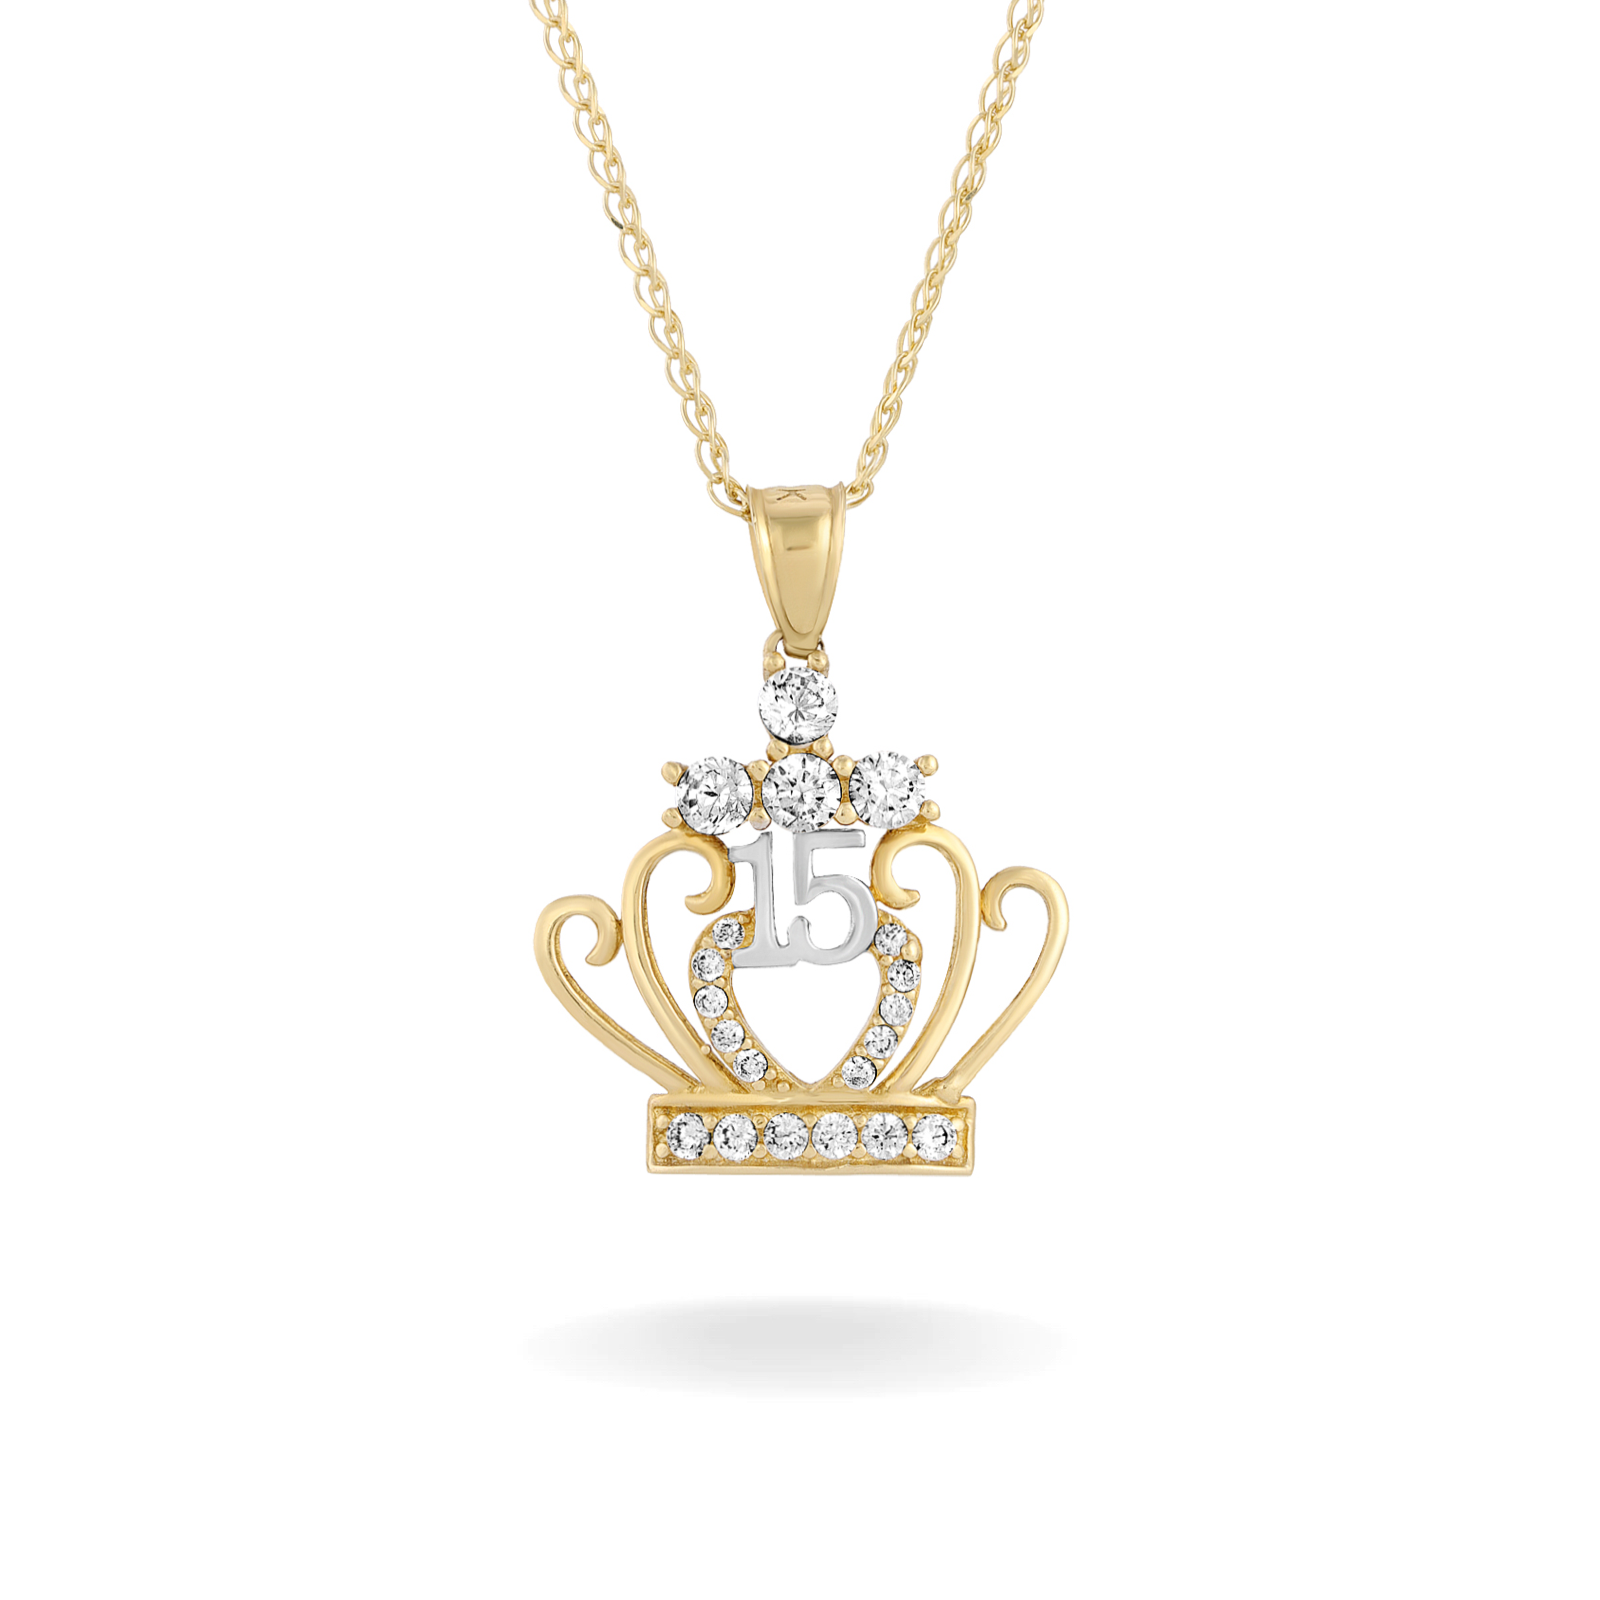 14K YELLOW GOLD PAVE CROWNED QUINCEANERA NECKLACE